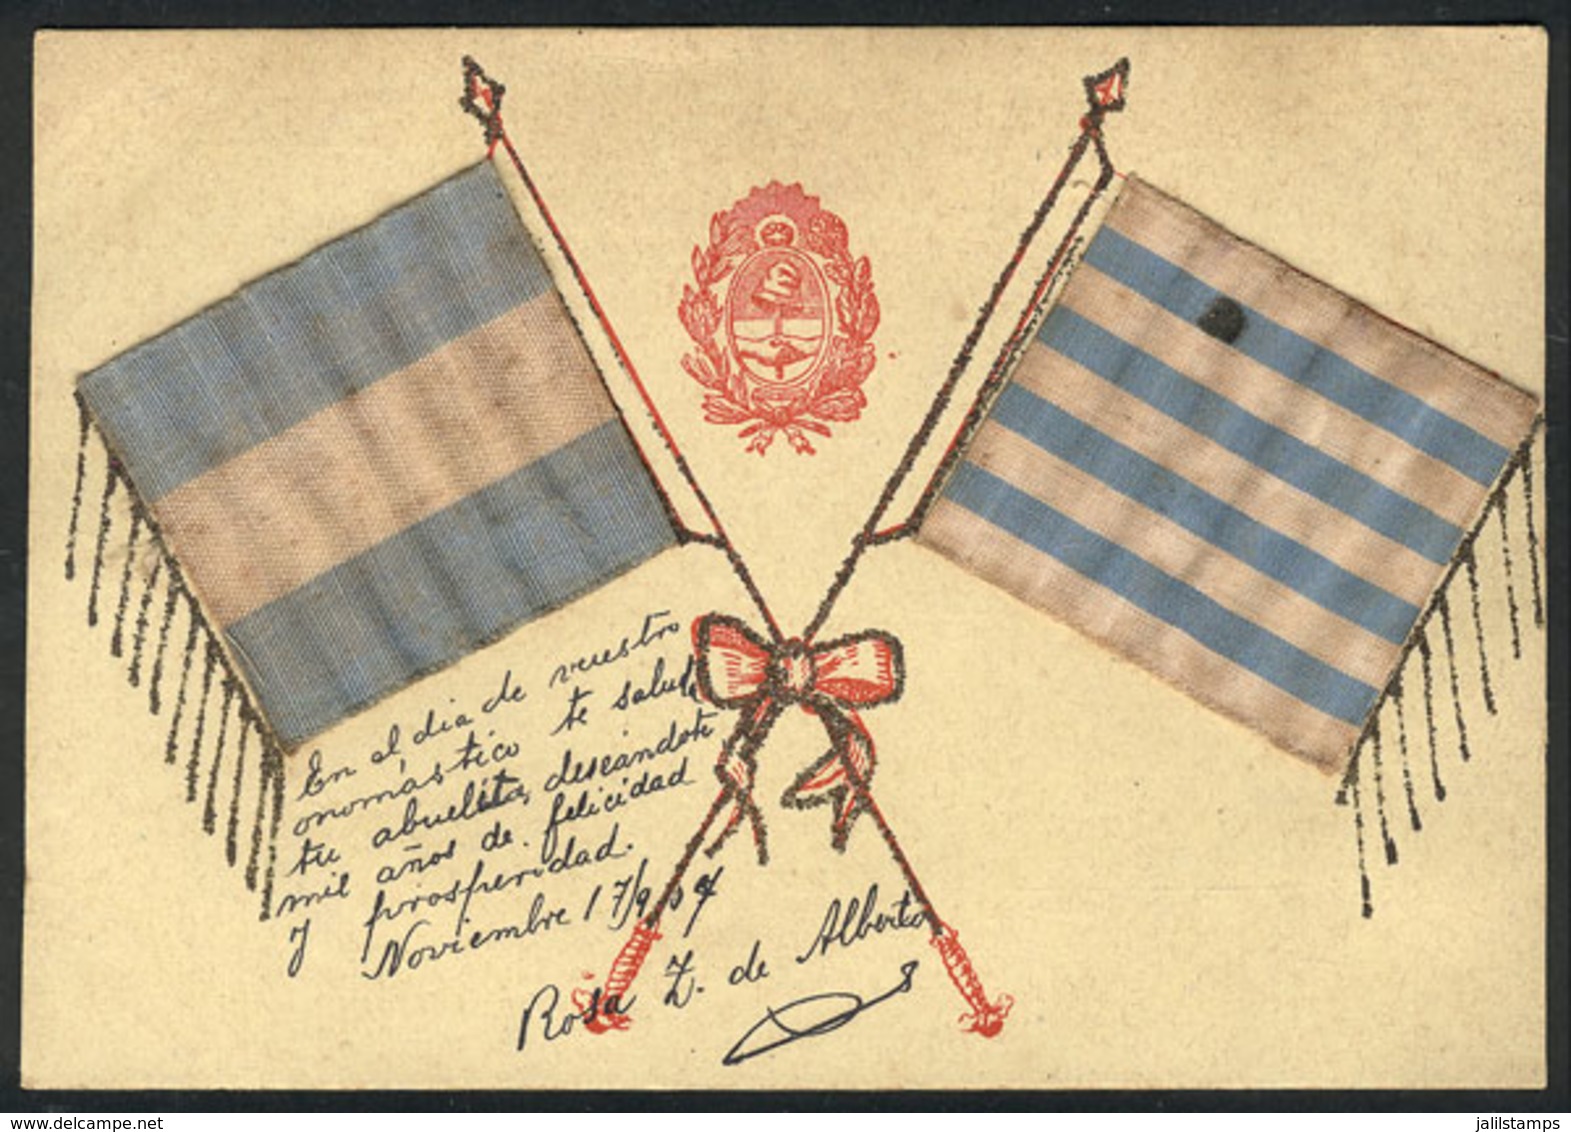 98 ARGENTINA: Flags Of Argentina And Uruguay Made Of Cloth, Used In 1907, VF Quality - Argentine